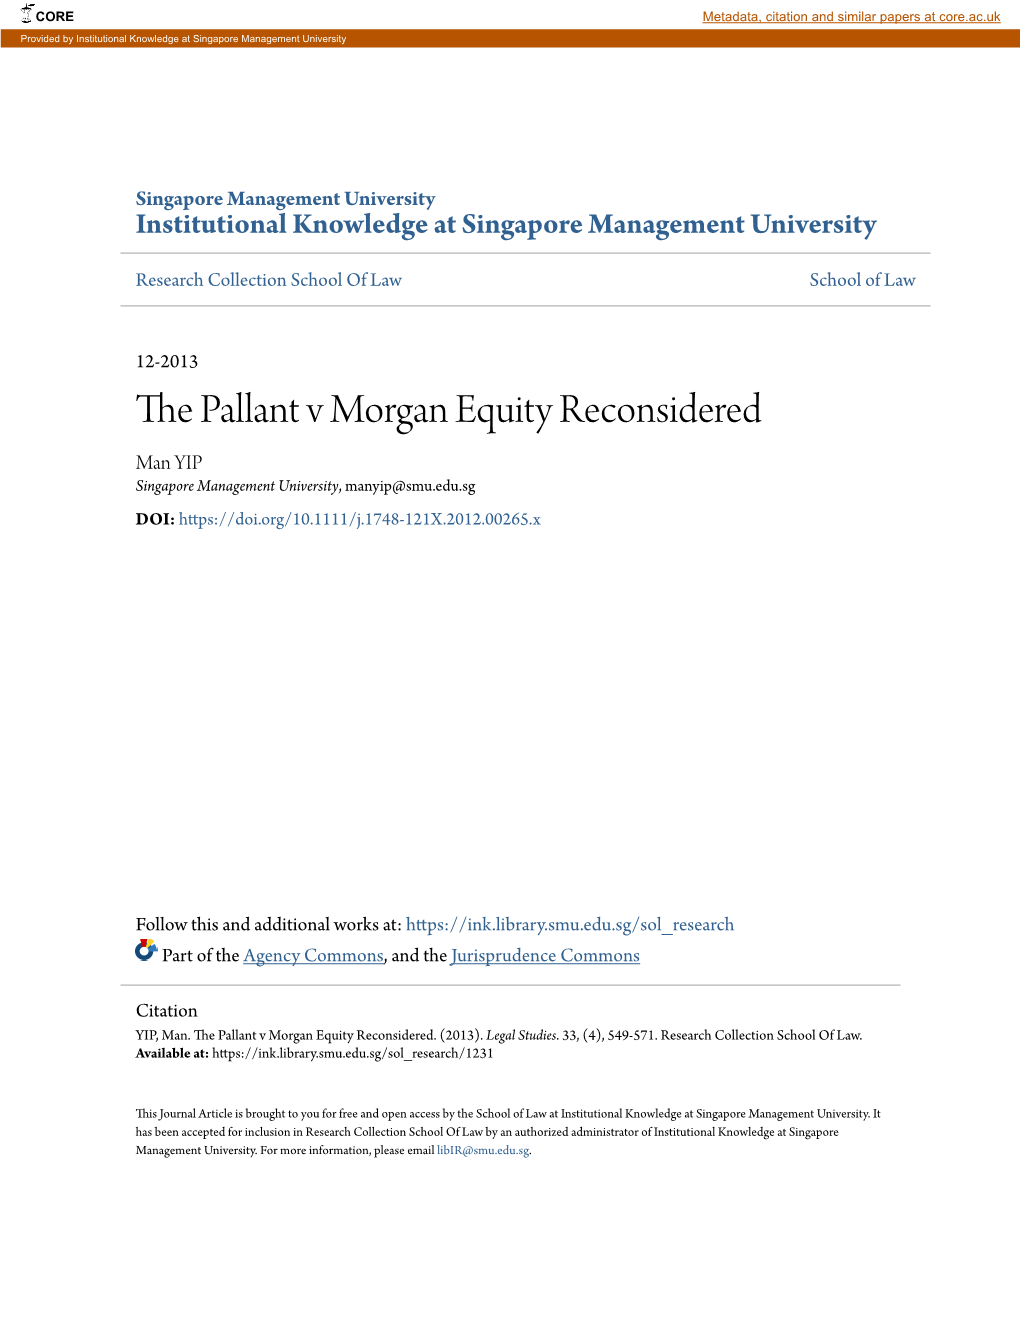 The Pallant V Morgan Equity Reconsidered